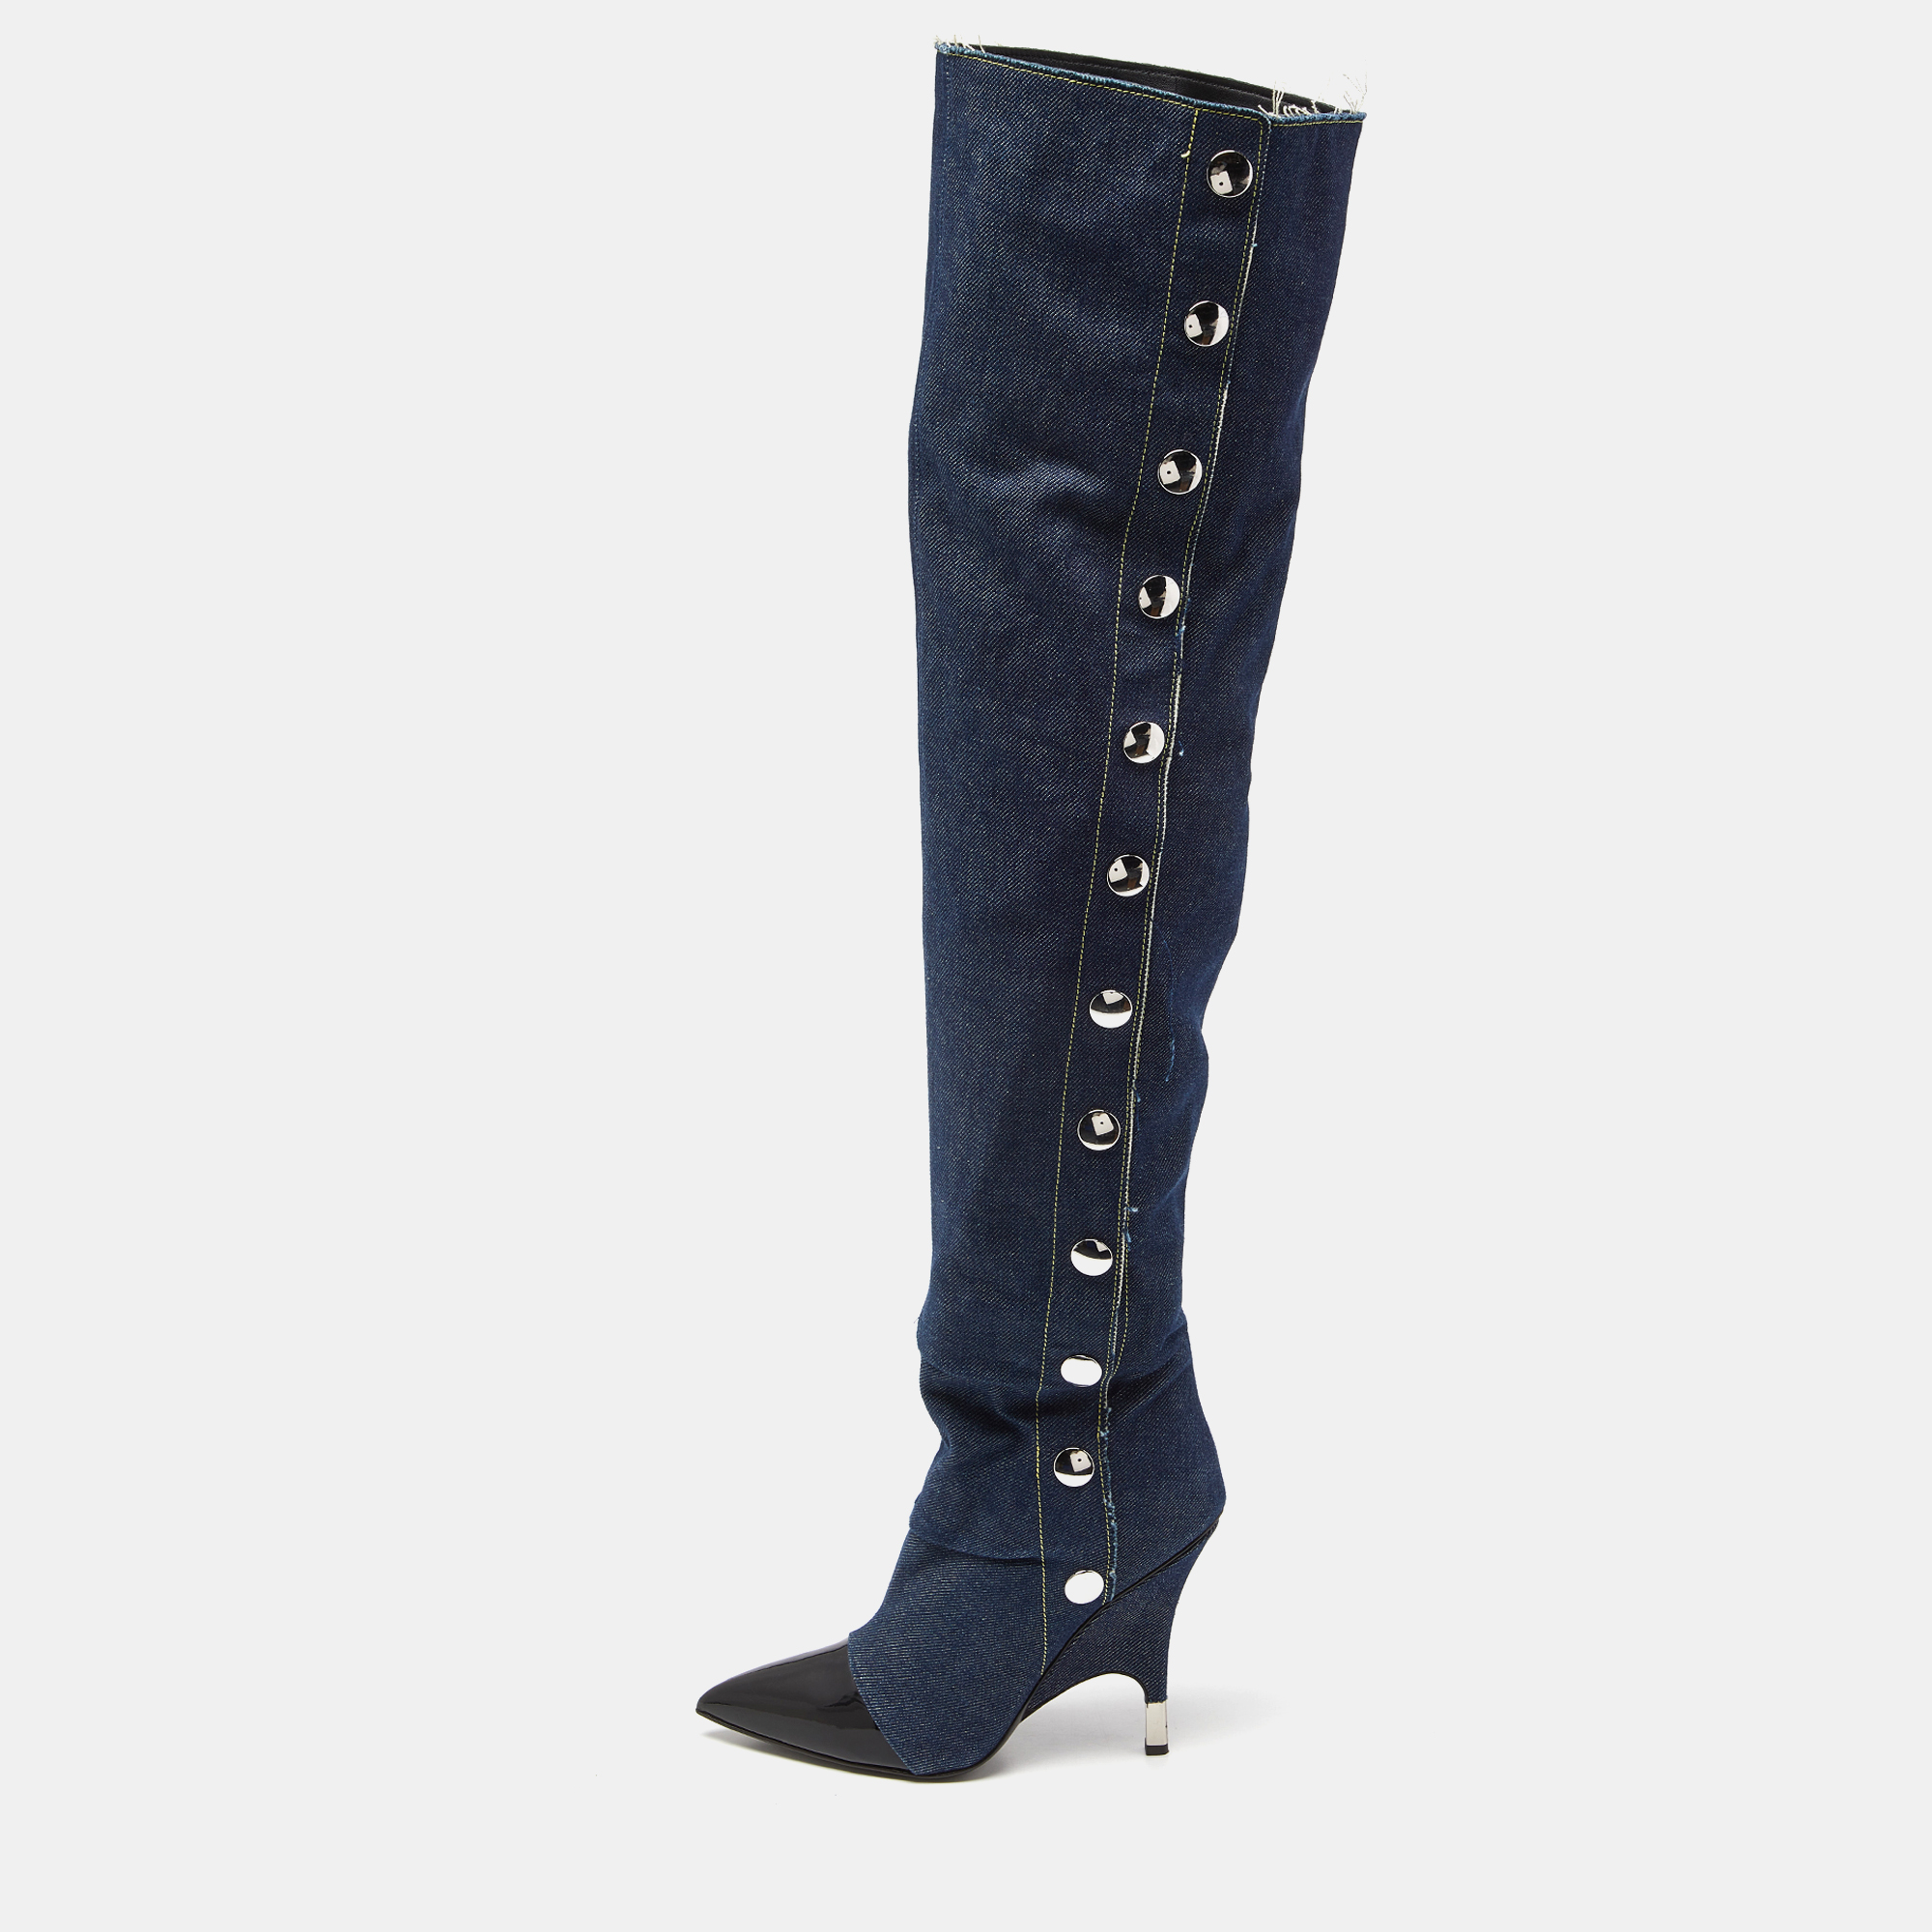 Giuseppe zanotti blue/black denim and patent leather over the knee length boots size 40